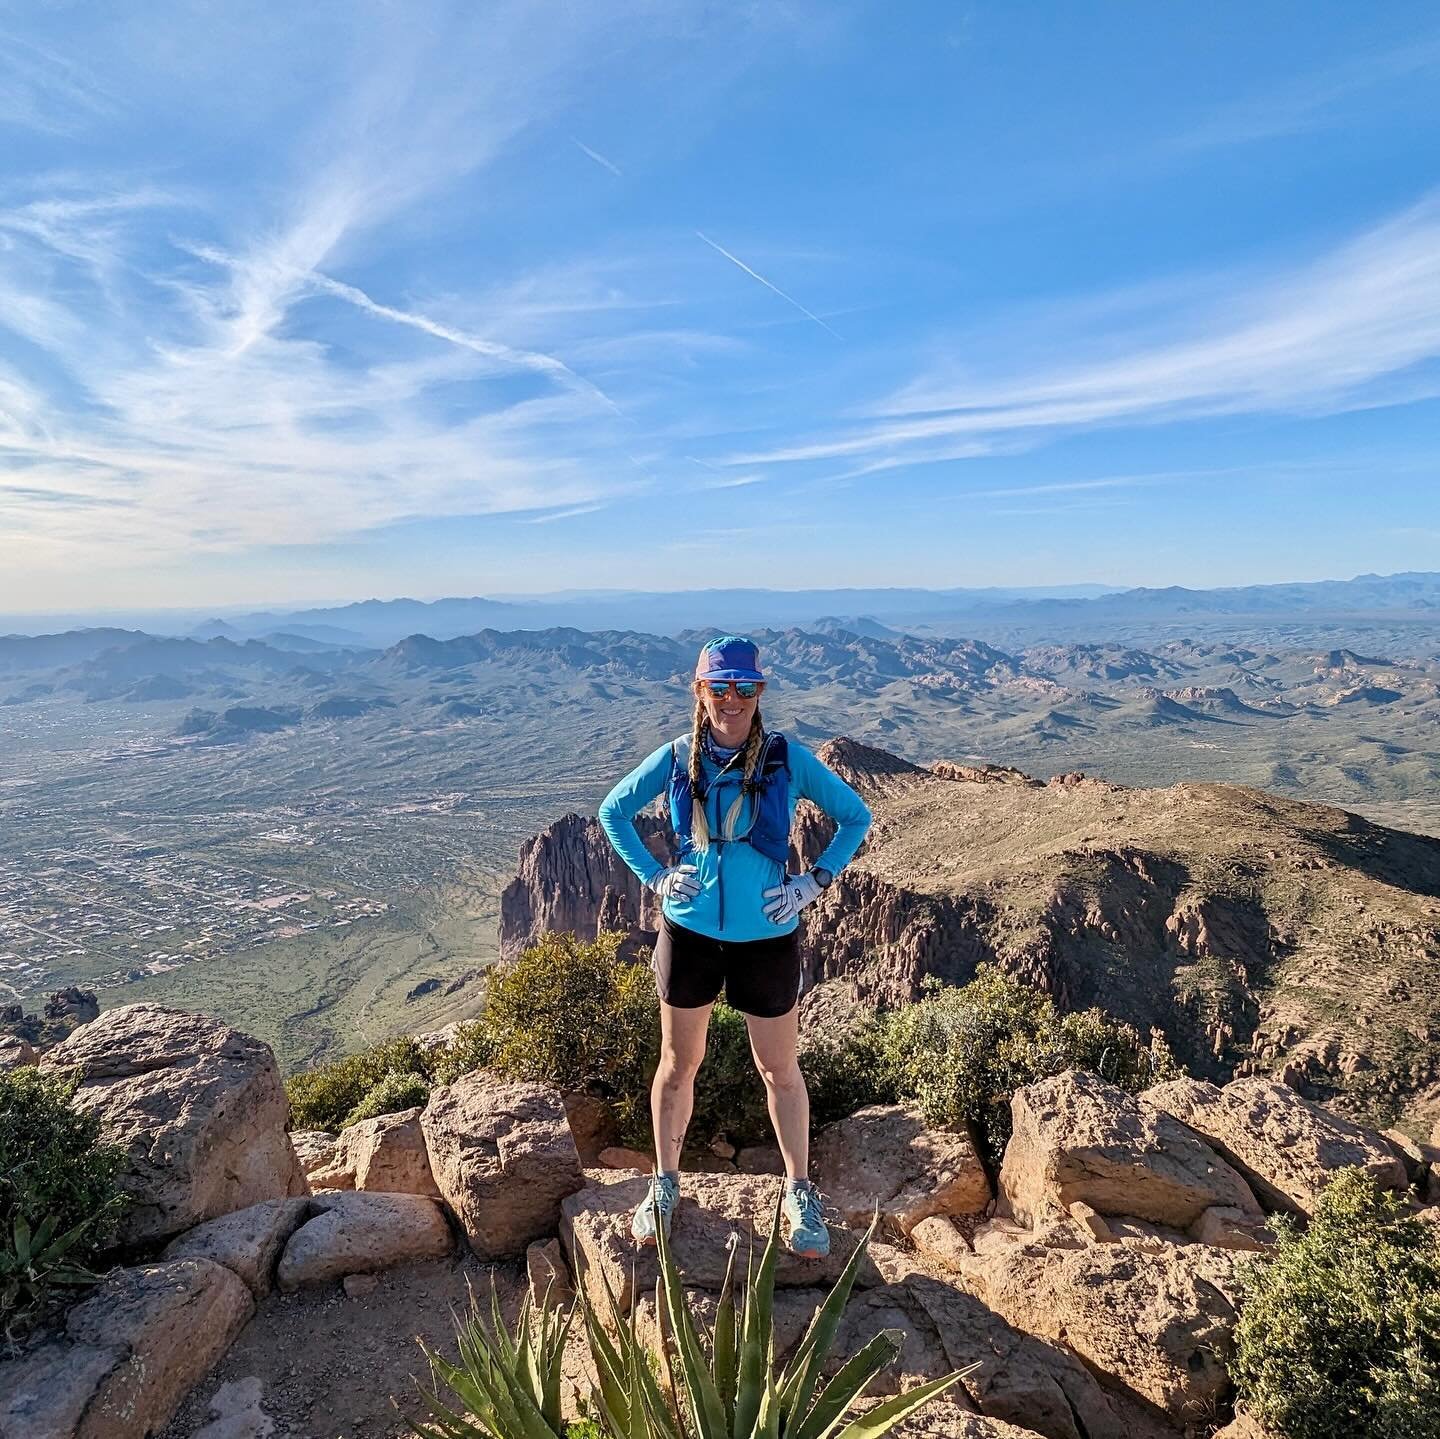 Life lately&hellip;.
Steep hikes that scared the shit outta me. 🏜️
Good company. 🥰
Sunsets. 🌄
Rainbows. 🌈
Flowers. 🌼
&hellip; with a ghost town as home base for the past month&hellip; 👻 

Heading north soon, but sure have enjoyed my desert wint